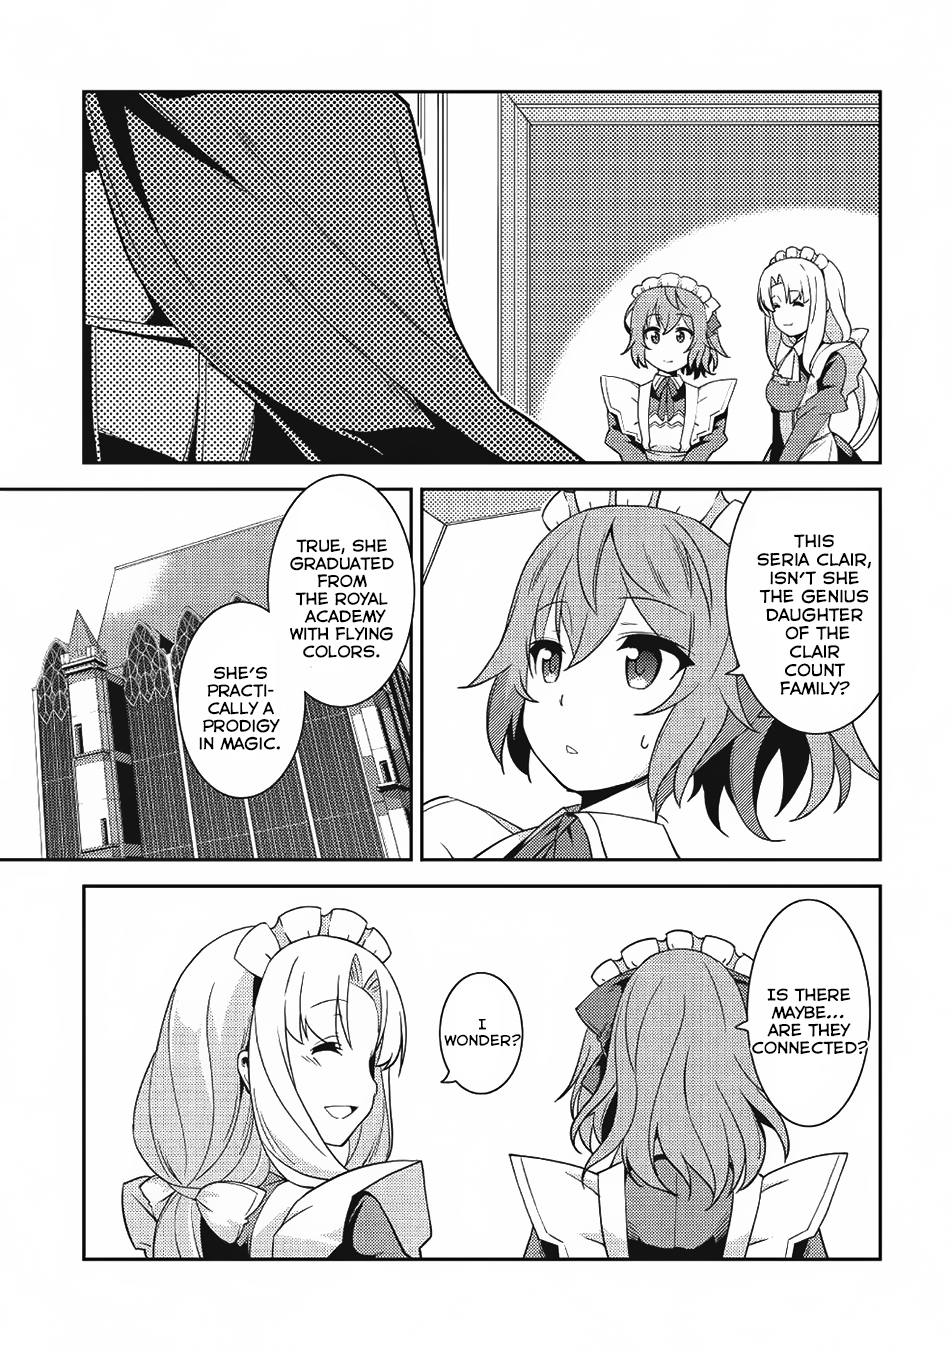 Seirei Gensouki Vol. 3 Ch. 14 Lotte from the Rikka Company